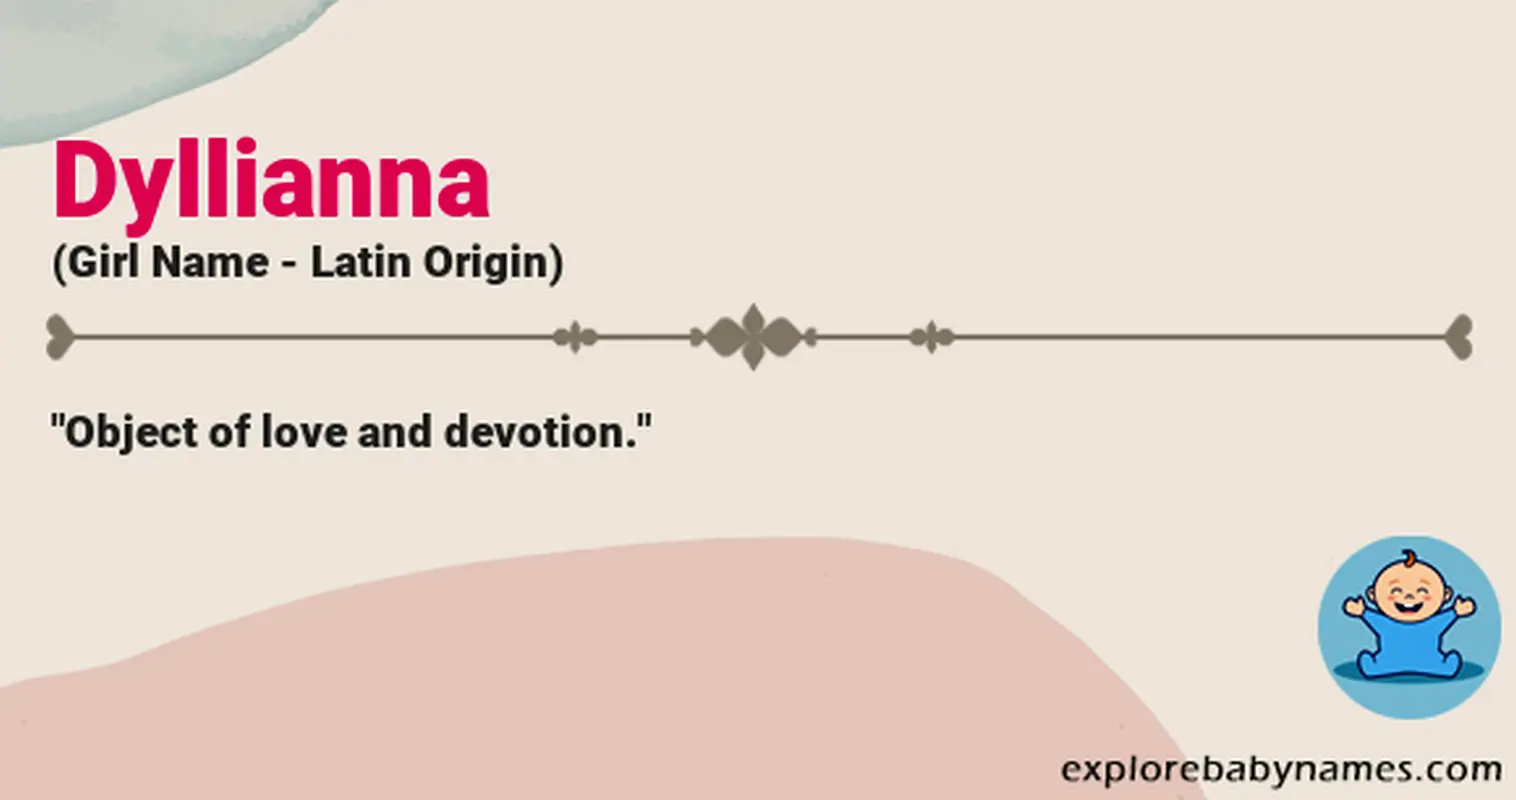 Meaning of Dyllianna